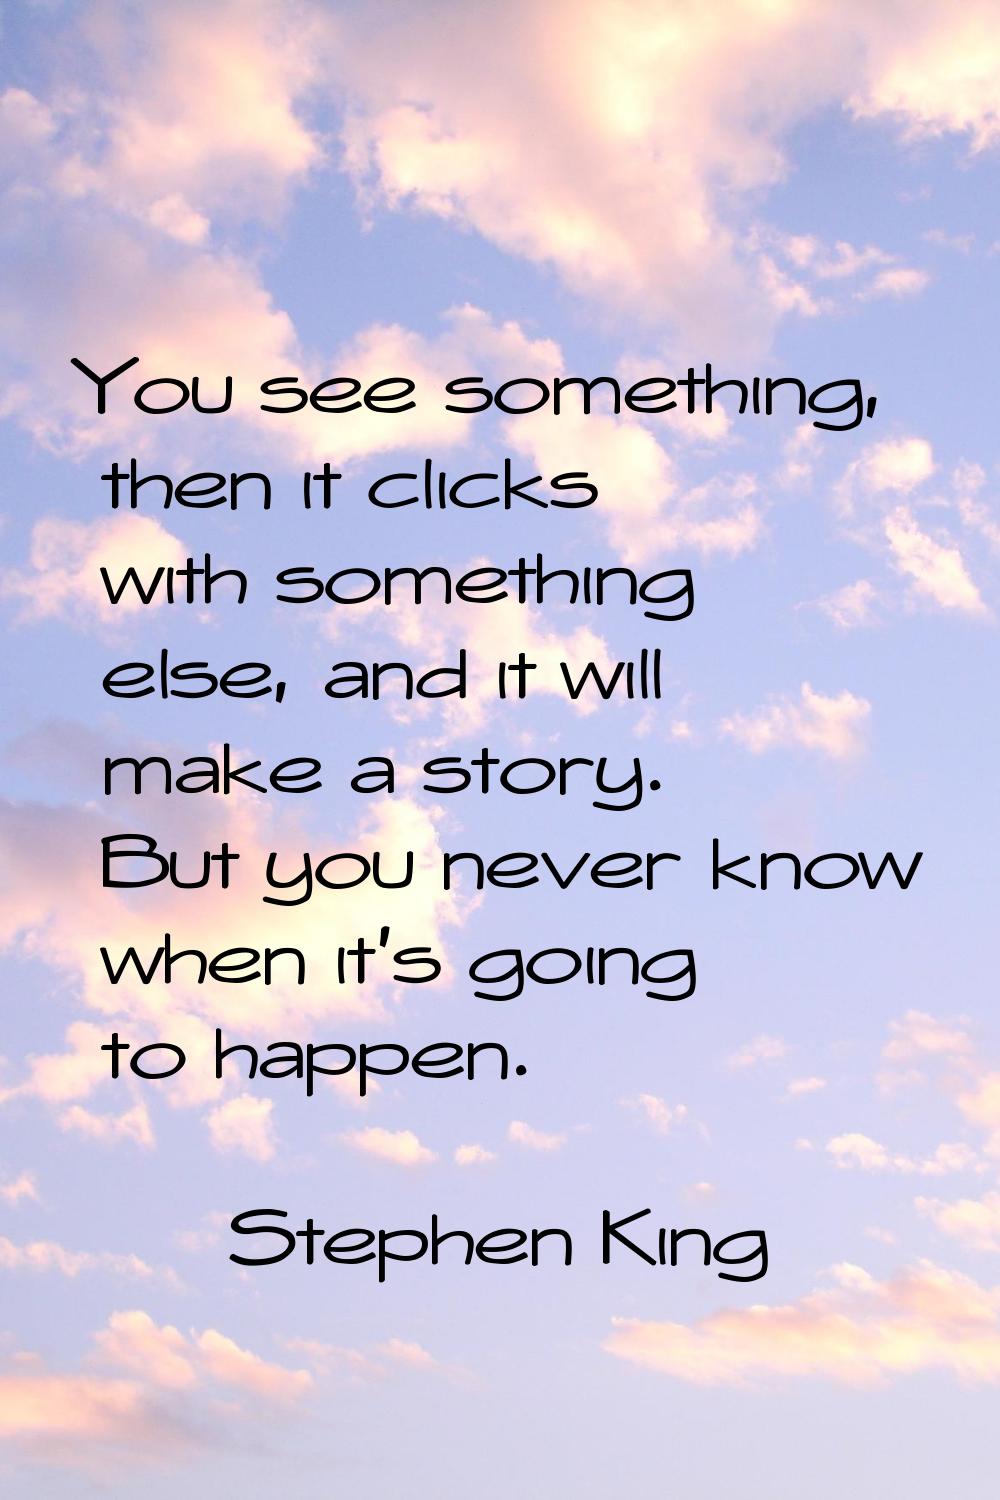 You see something, then it clicks with something else, and it will make a story. But you never know